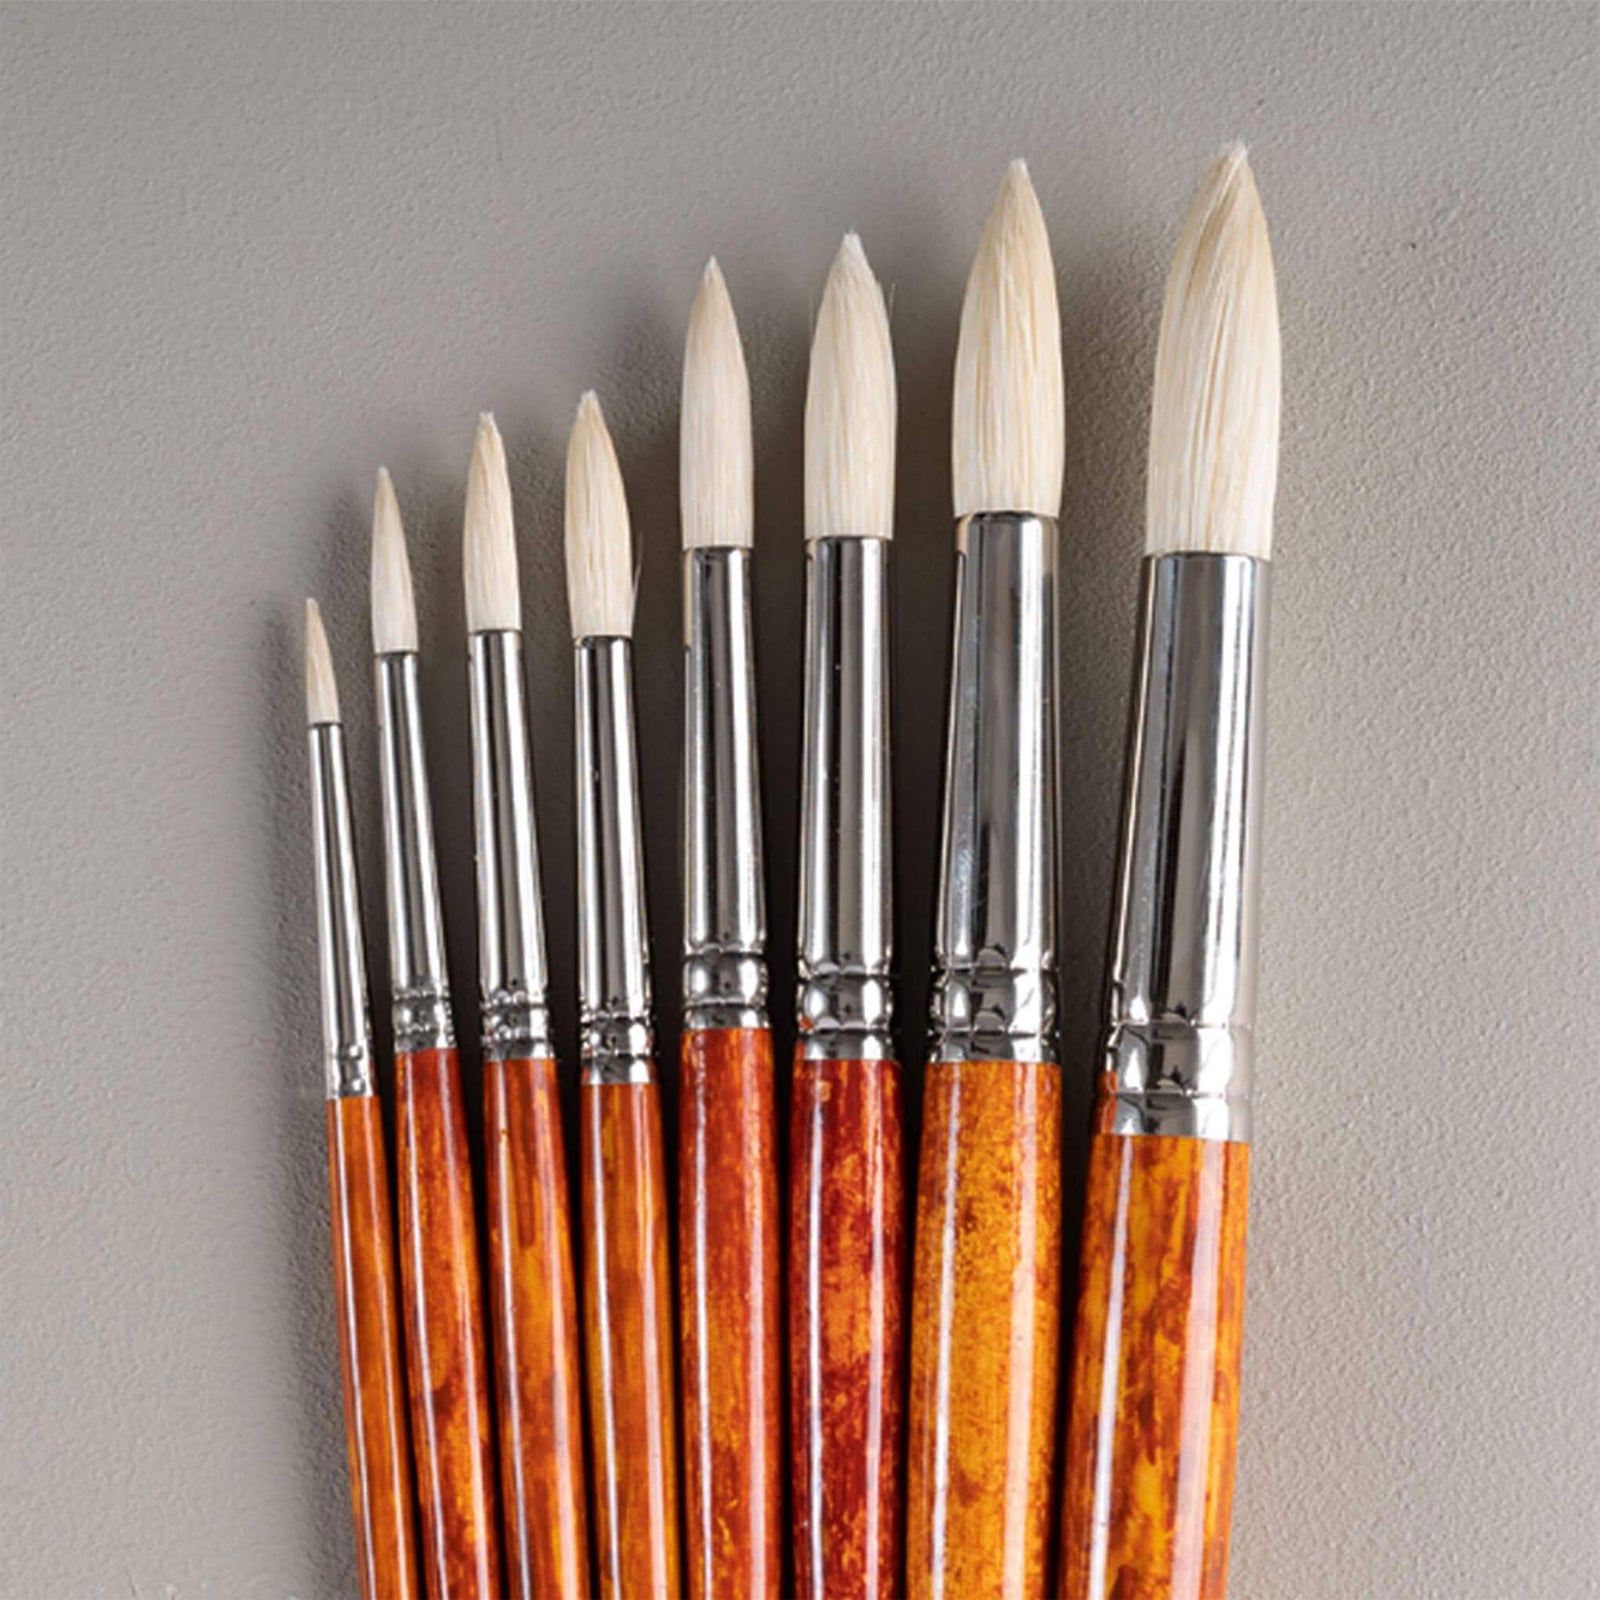 Buy Oil Paint Brushes Online today